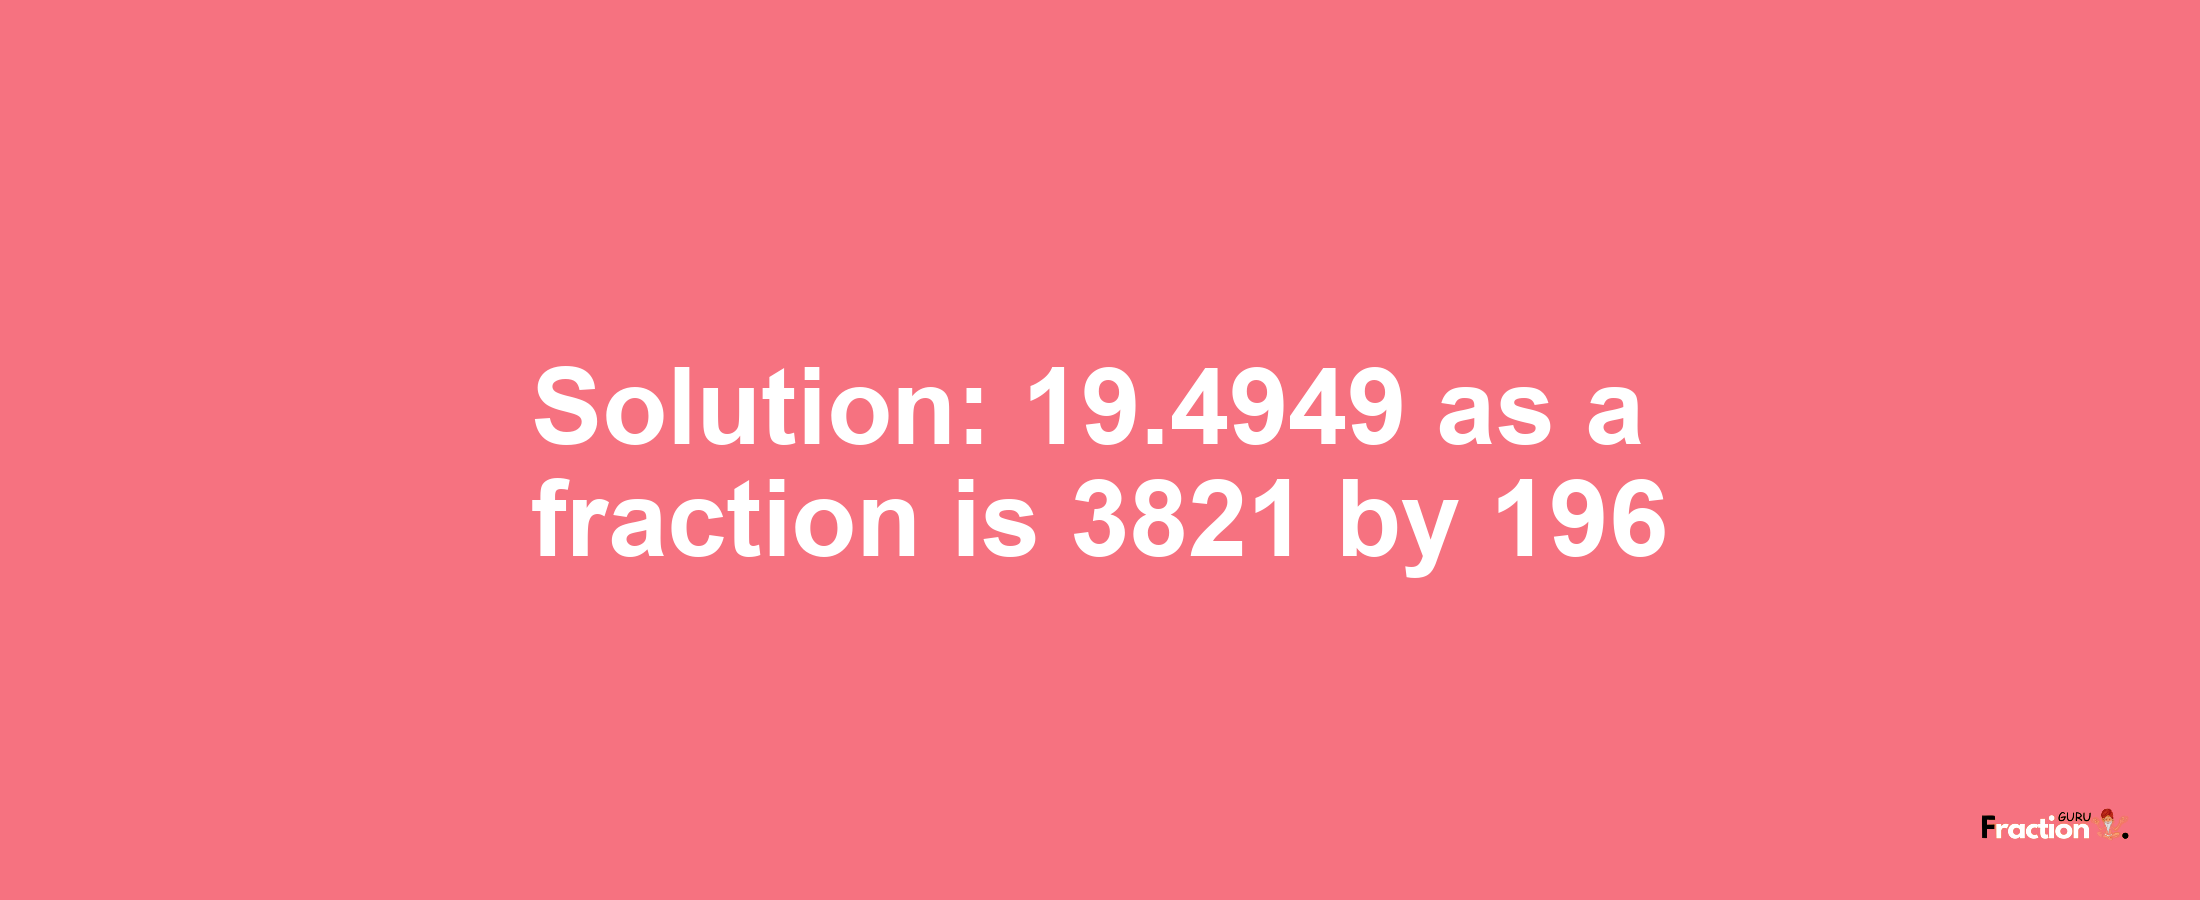 Solution:19.4949 as a fraction is 3821/196